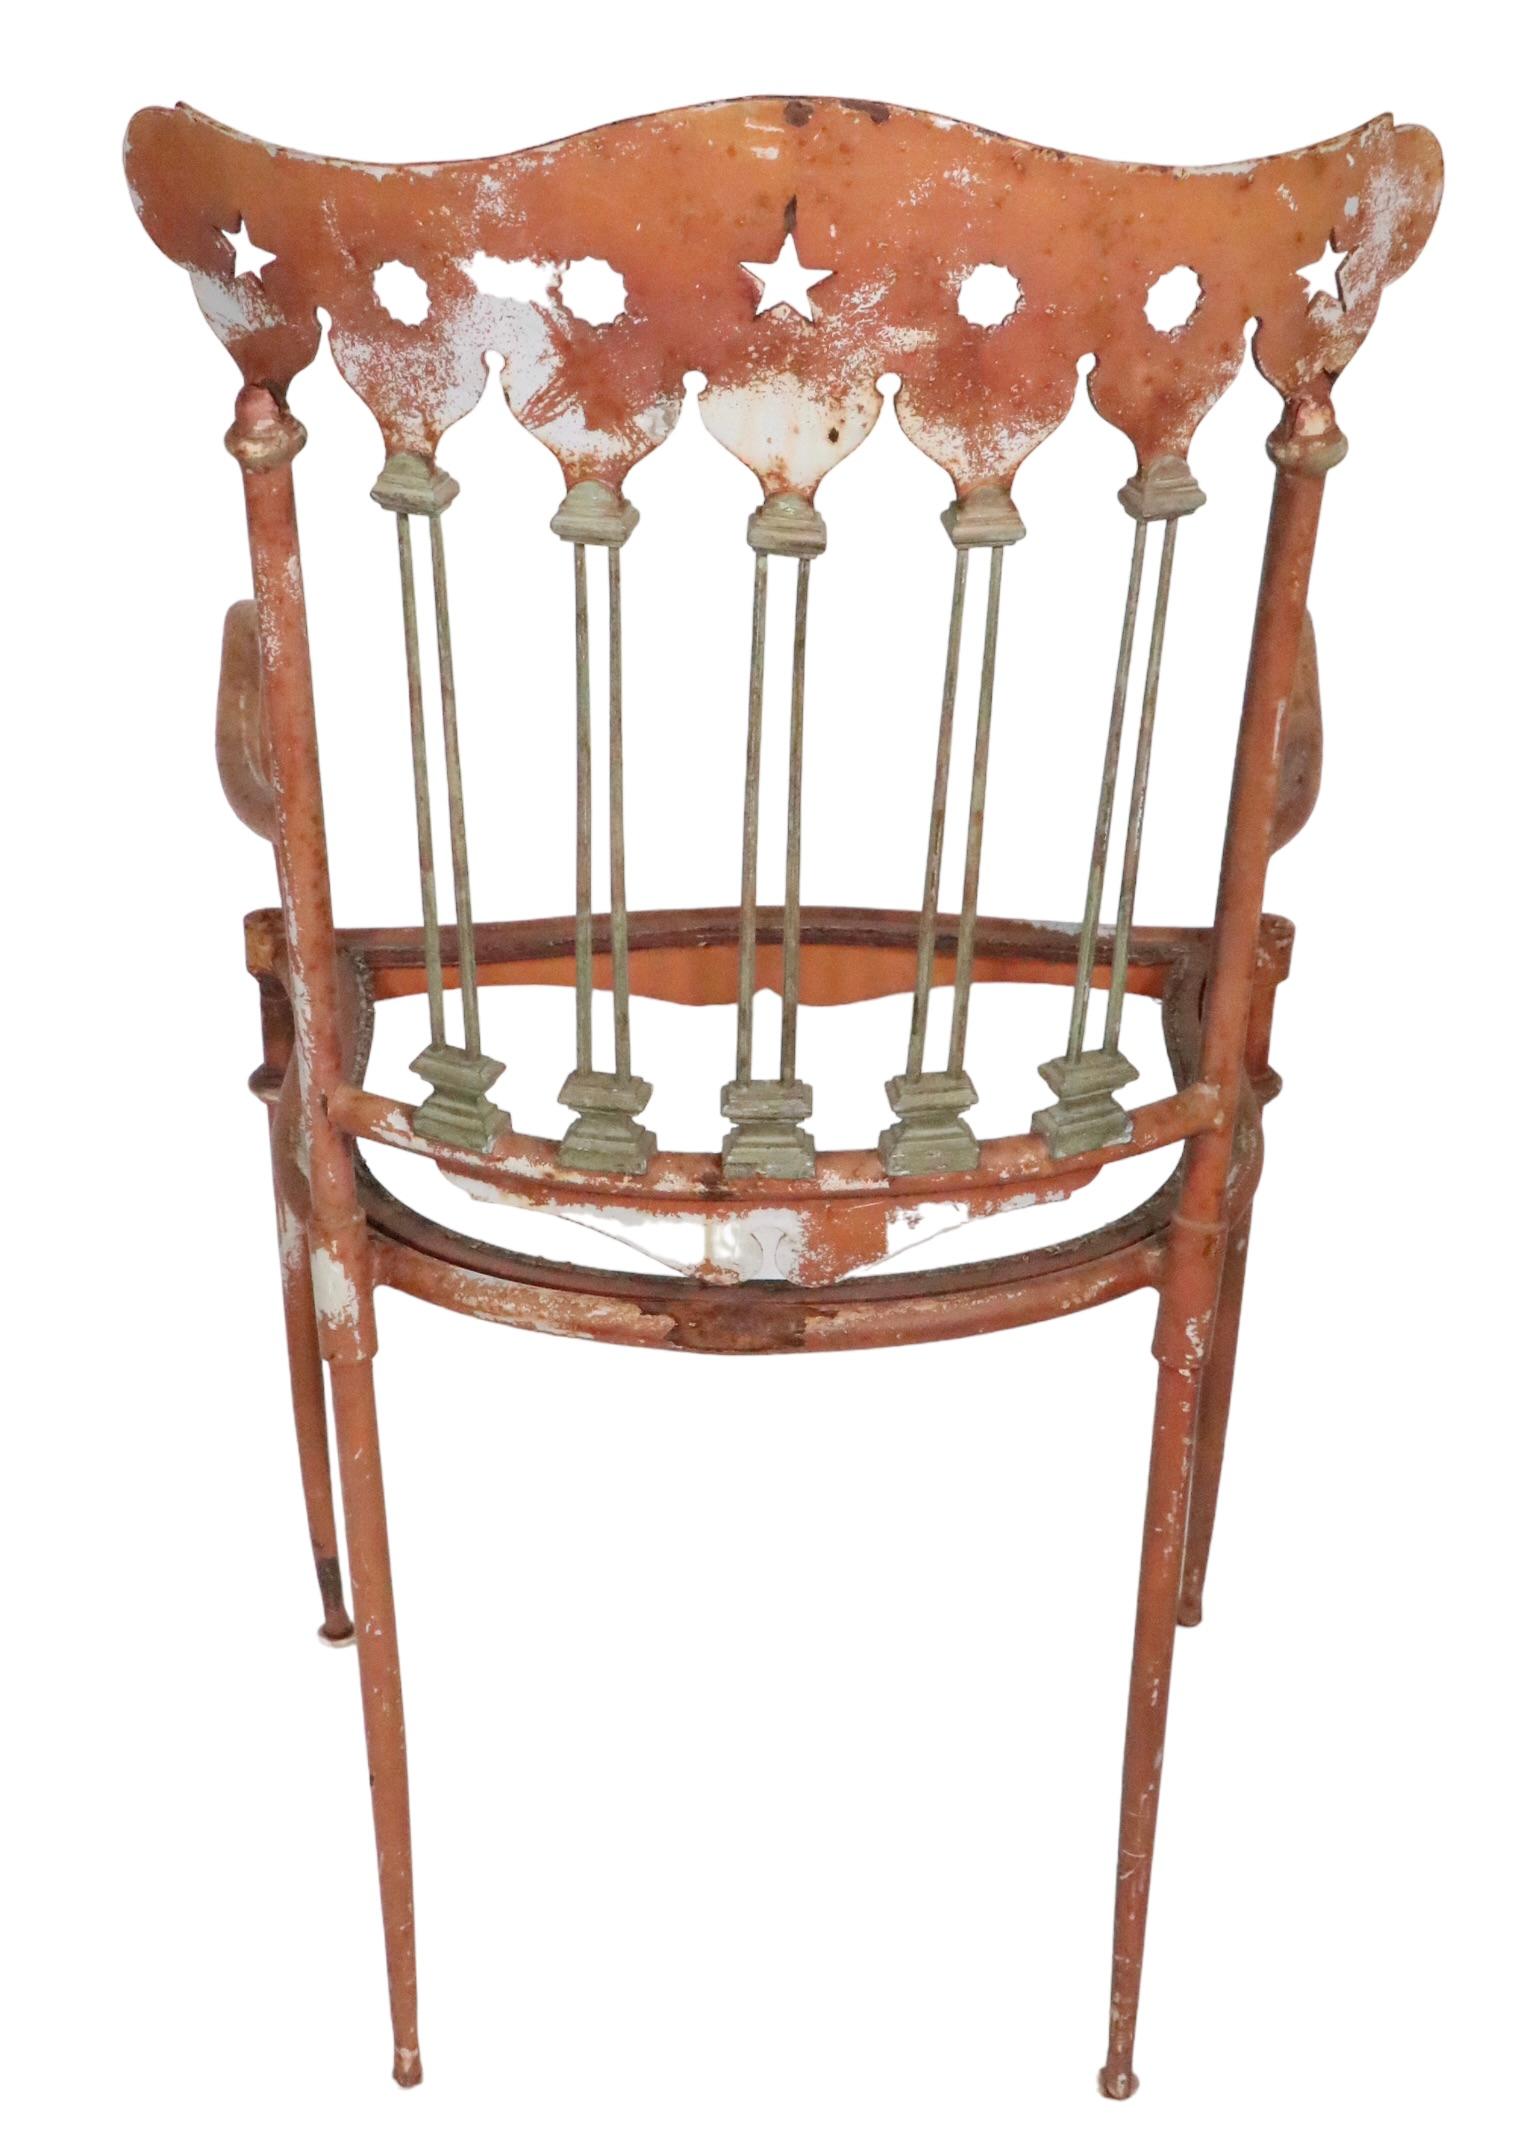   Decorative Antique Iron Brass and Steel Garden Patio Chair c 1900/1930's For Sale 10